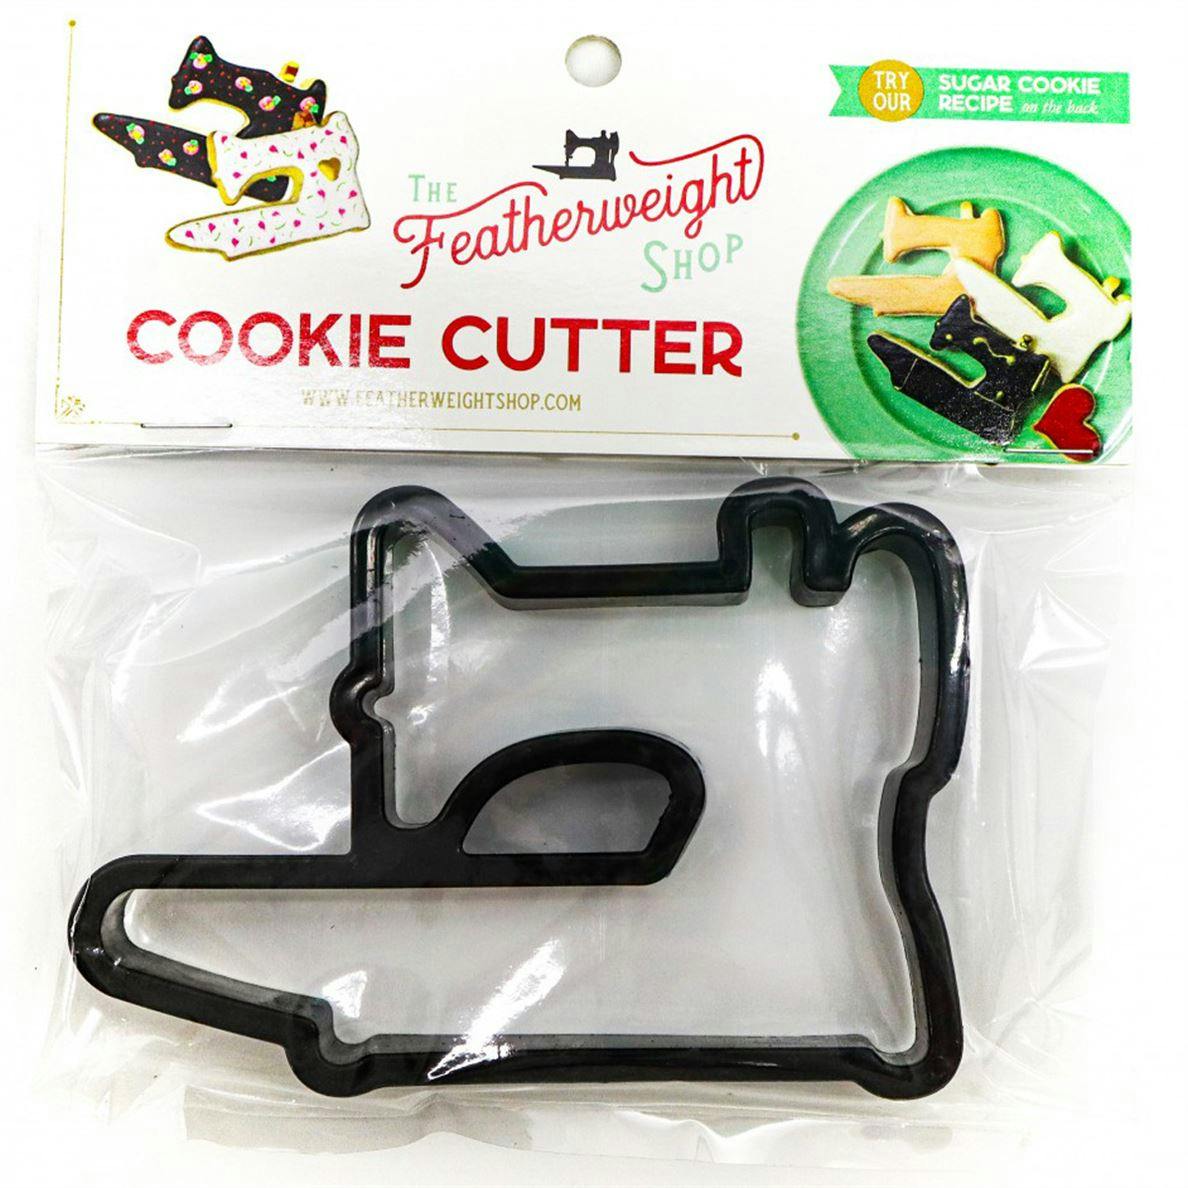 Cookie Cutter shaped like a sewing machine